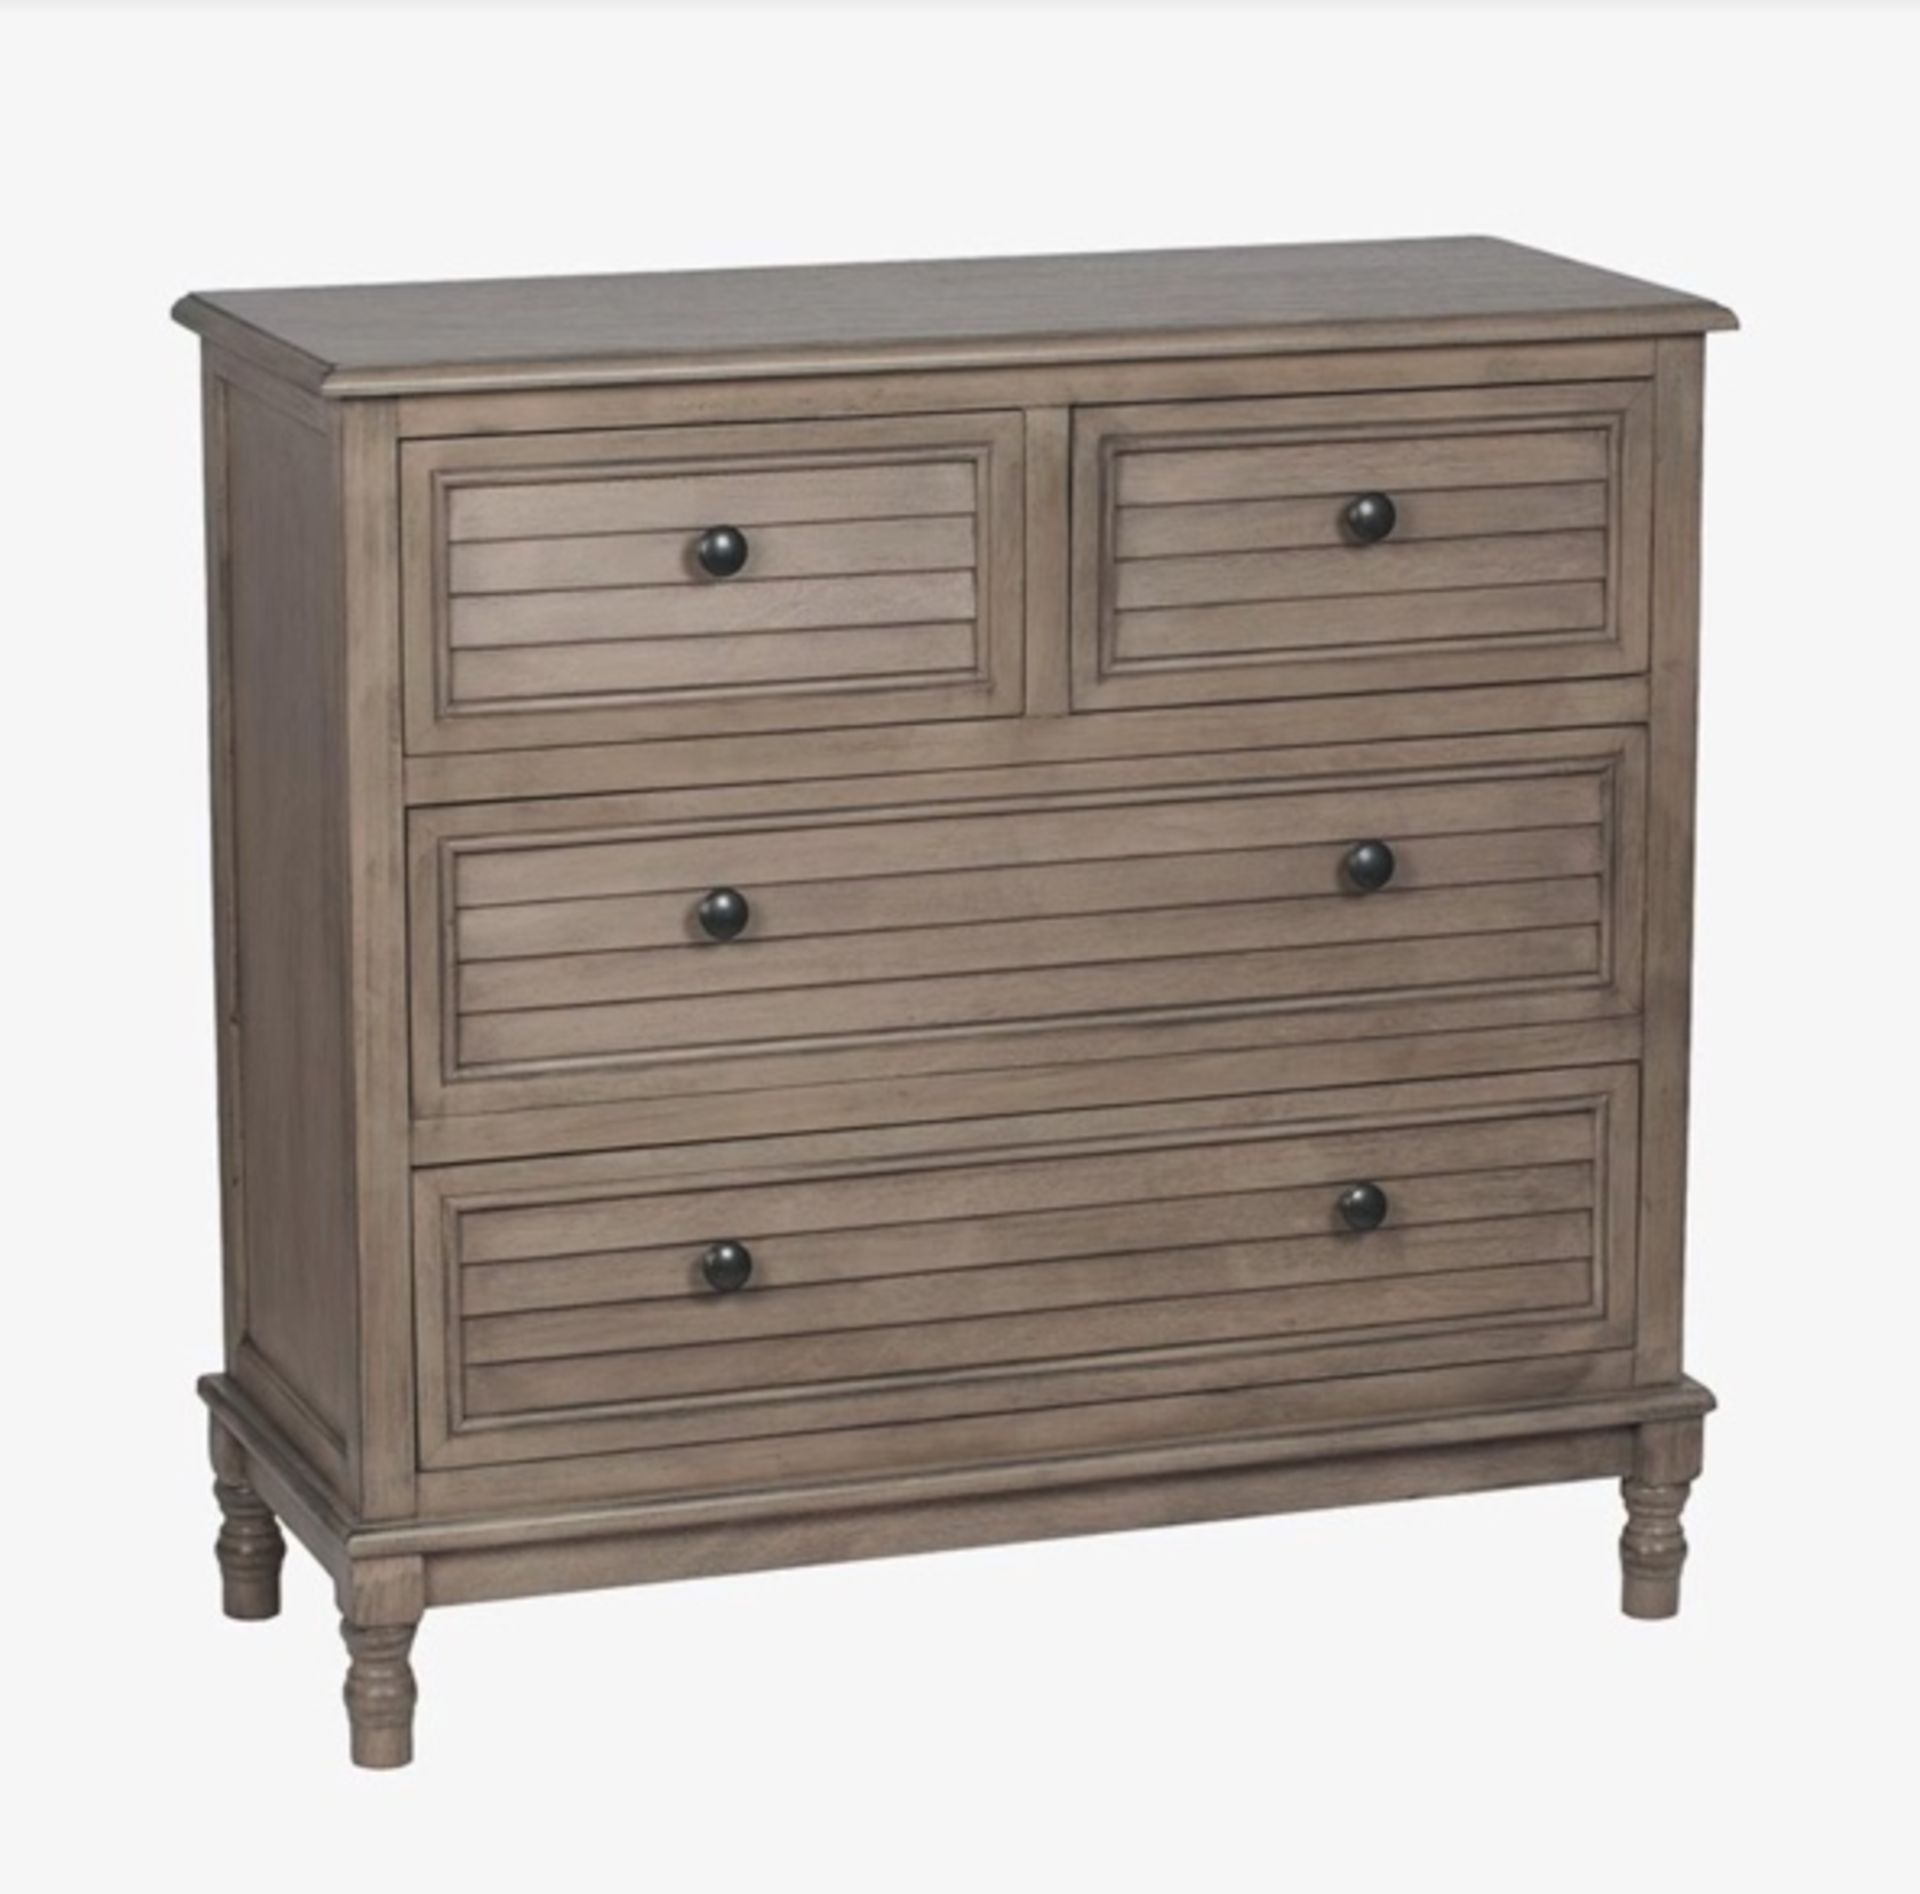 New in Box Ashwell Taupe Pine Wood 4 Drawer Unit RRP £349 **NO VAT**